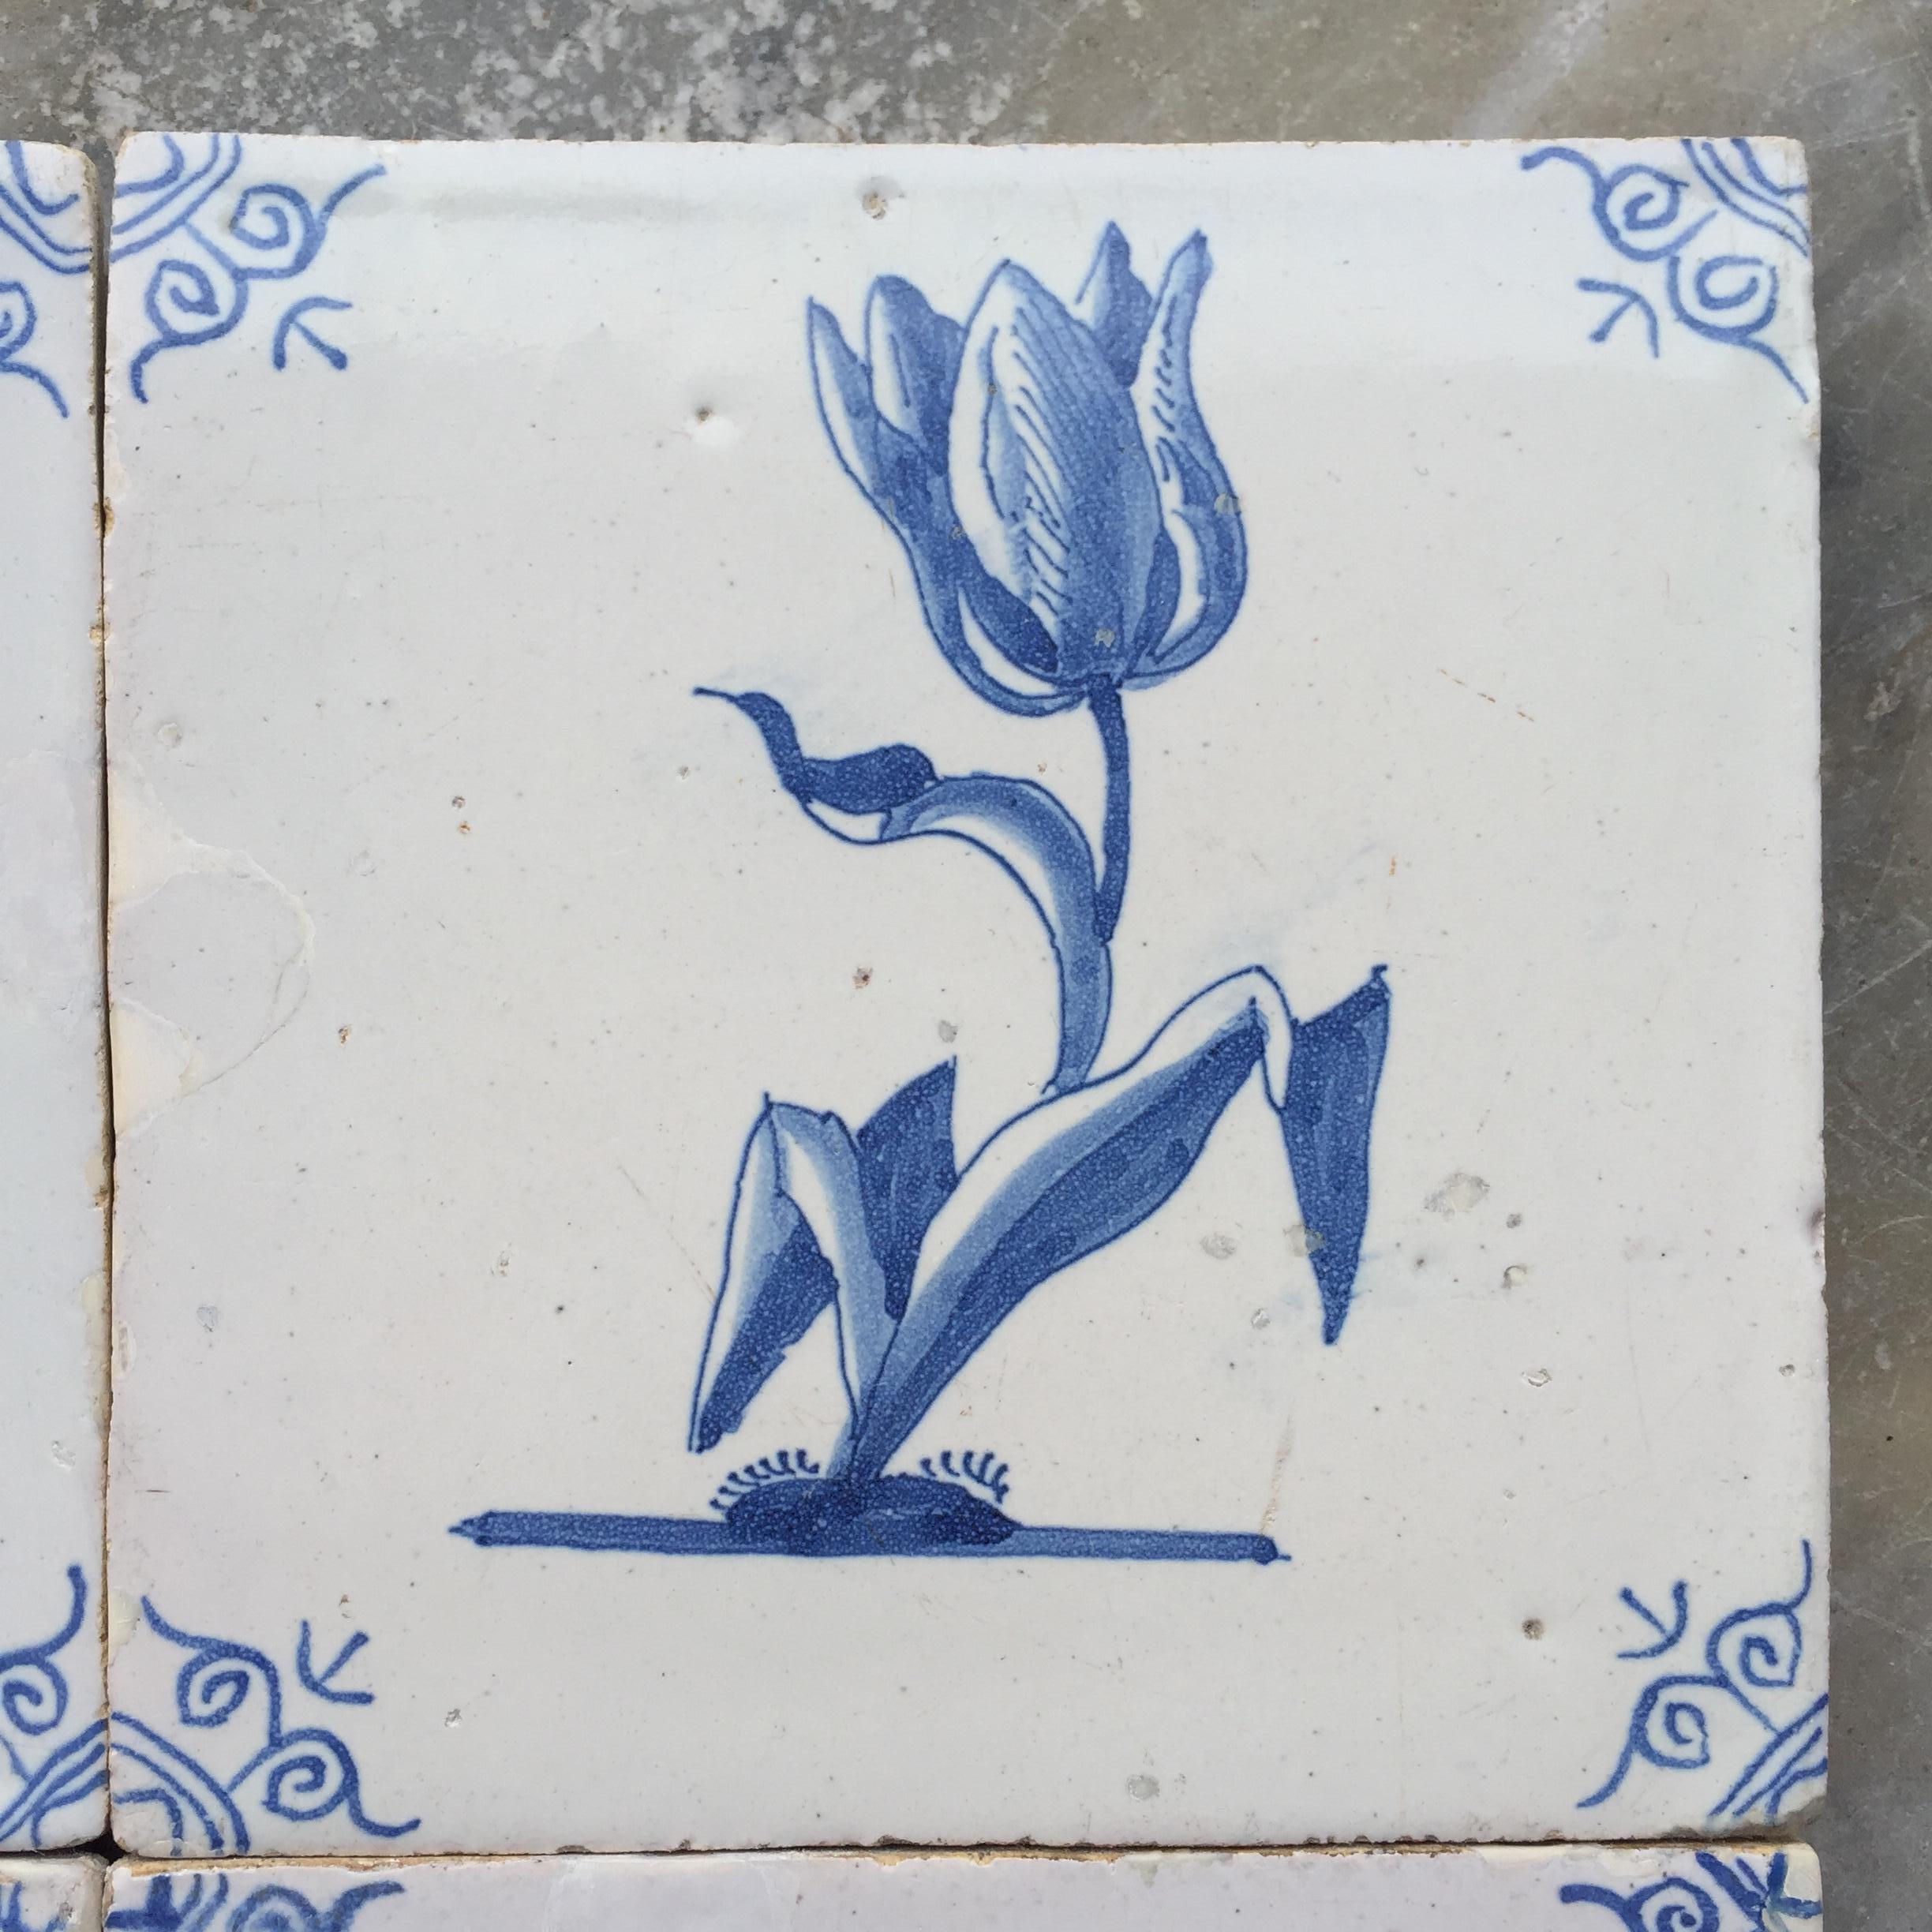 Rare Set of 12 Dutch Delft Tiles with Flowers and Insects, 17th Century 2